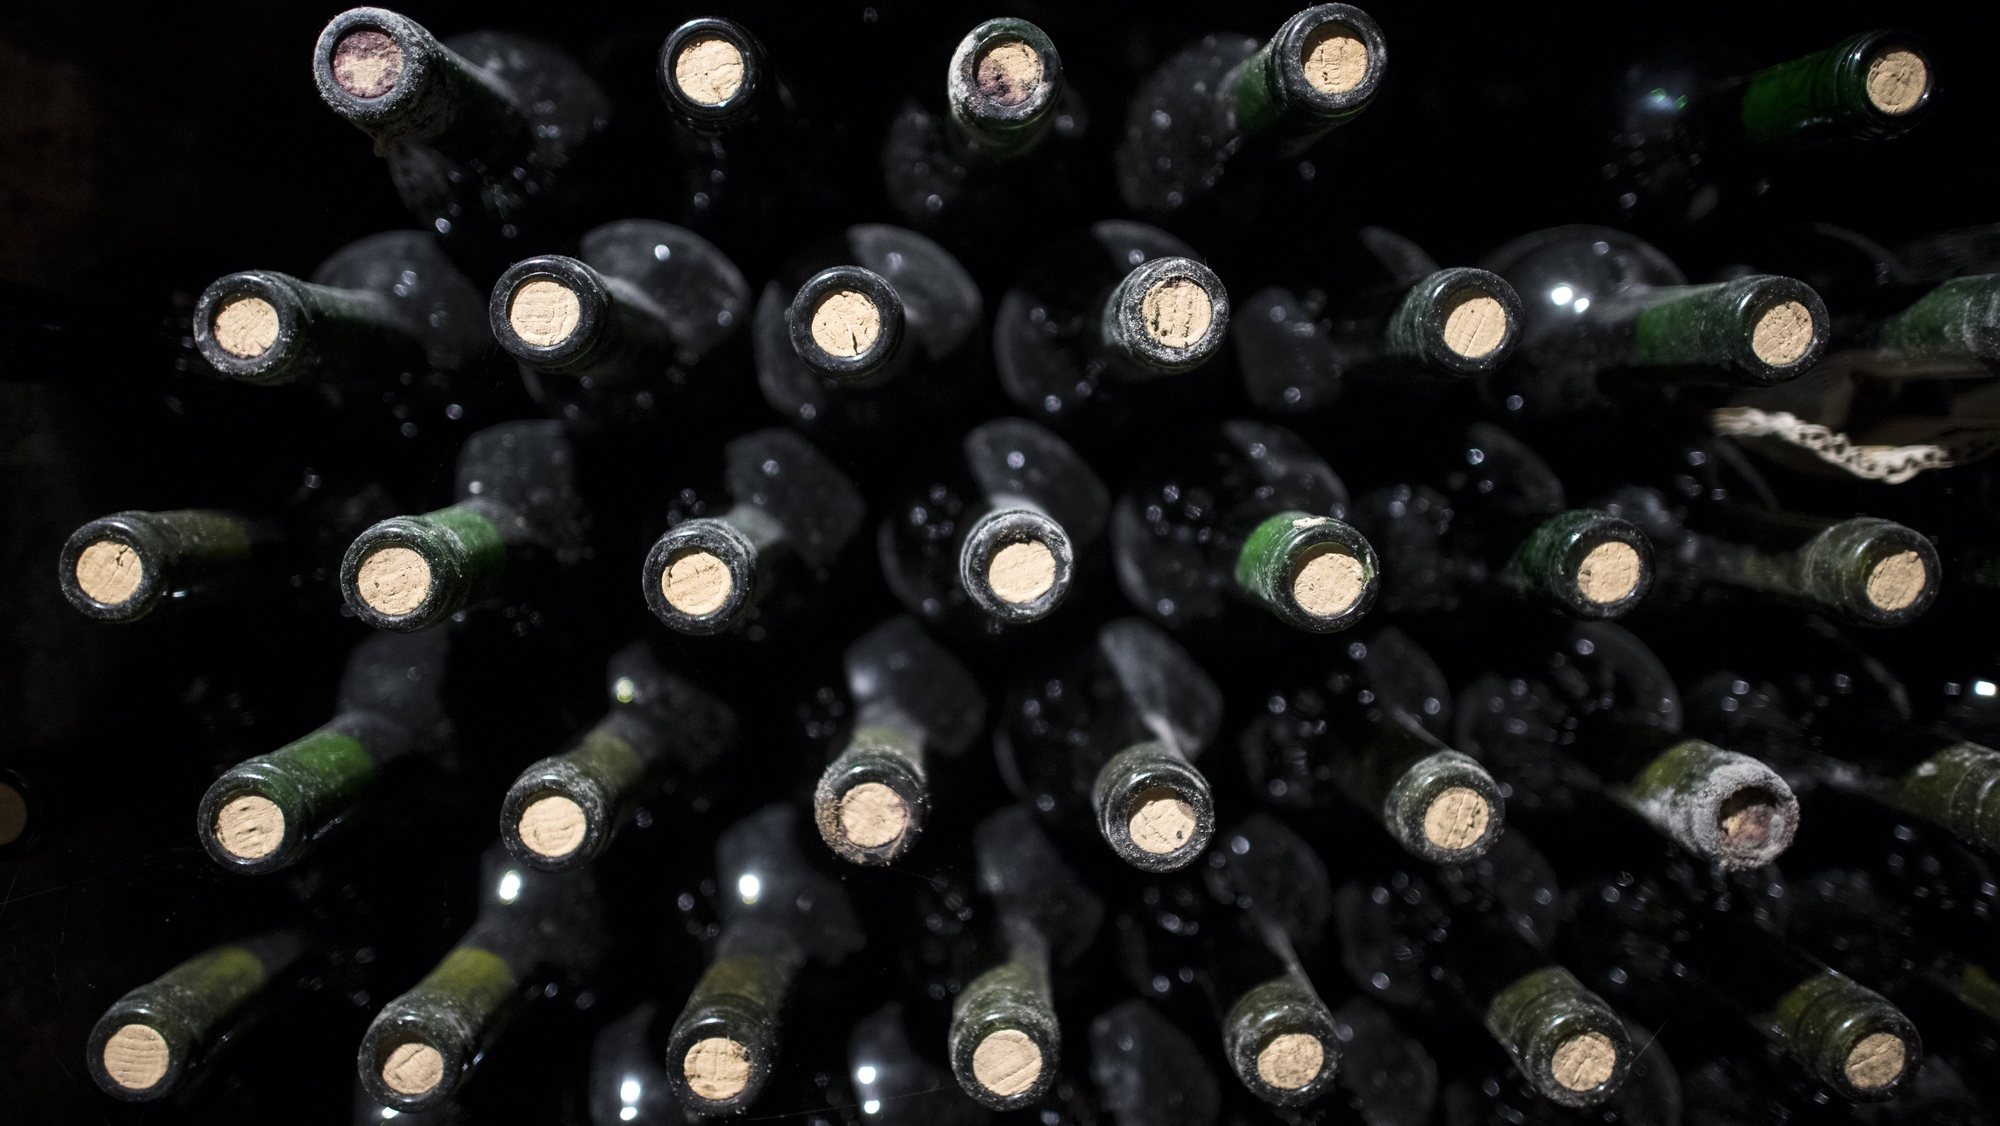 epa06321344 Bottles of wine are stacked in a wine cellar in Vienna, Austria, 10 November 2017. The Viennese wine growing region includes up to 700 hectare and a annually production of up to 20000 hectoliter.  EPA/CHRISTIAN BRUNA